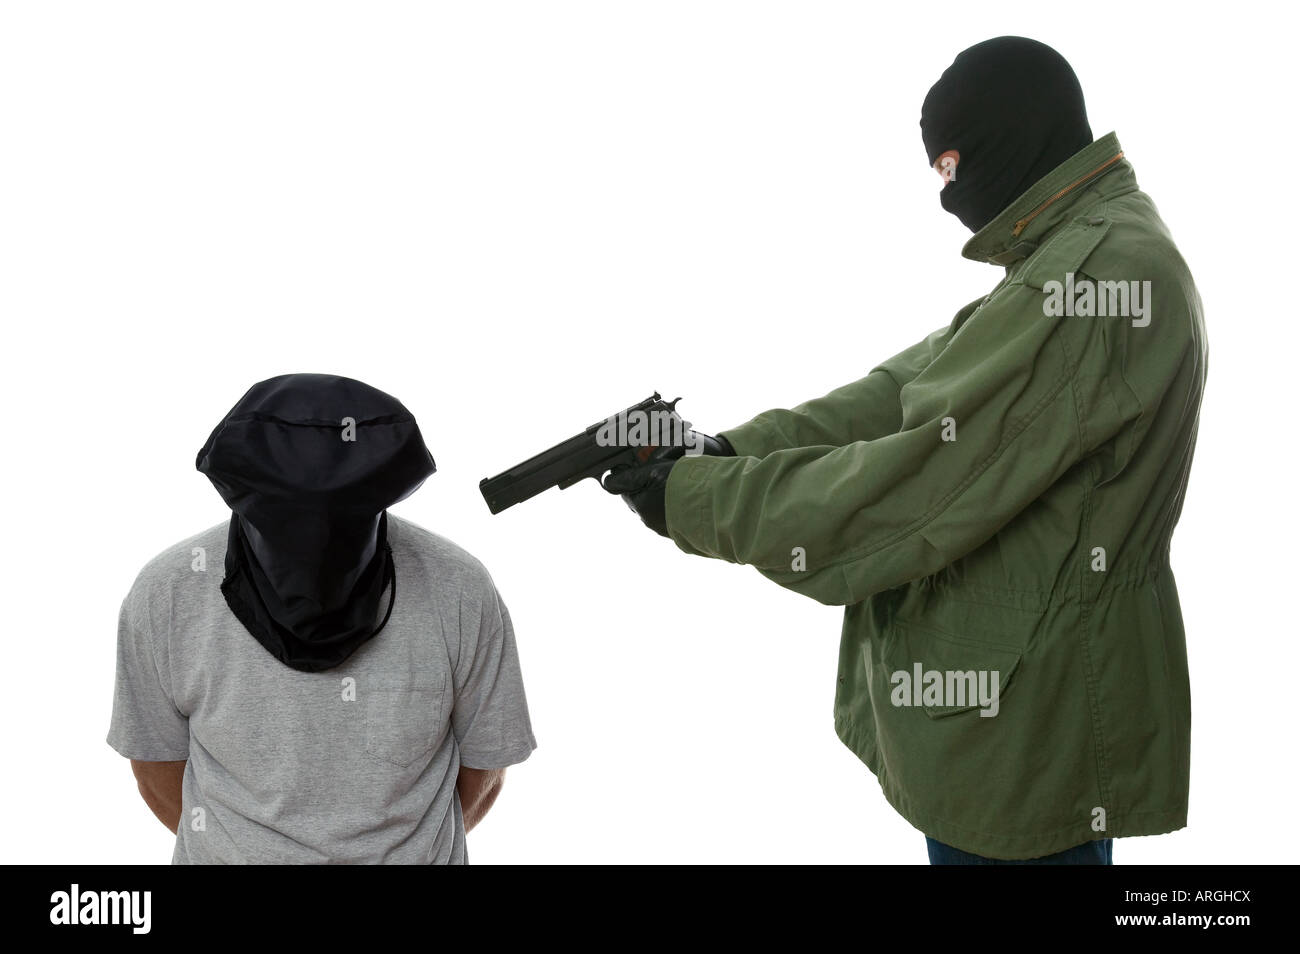 Armed man holding a gun to the head of a hooded man Stock Photo